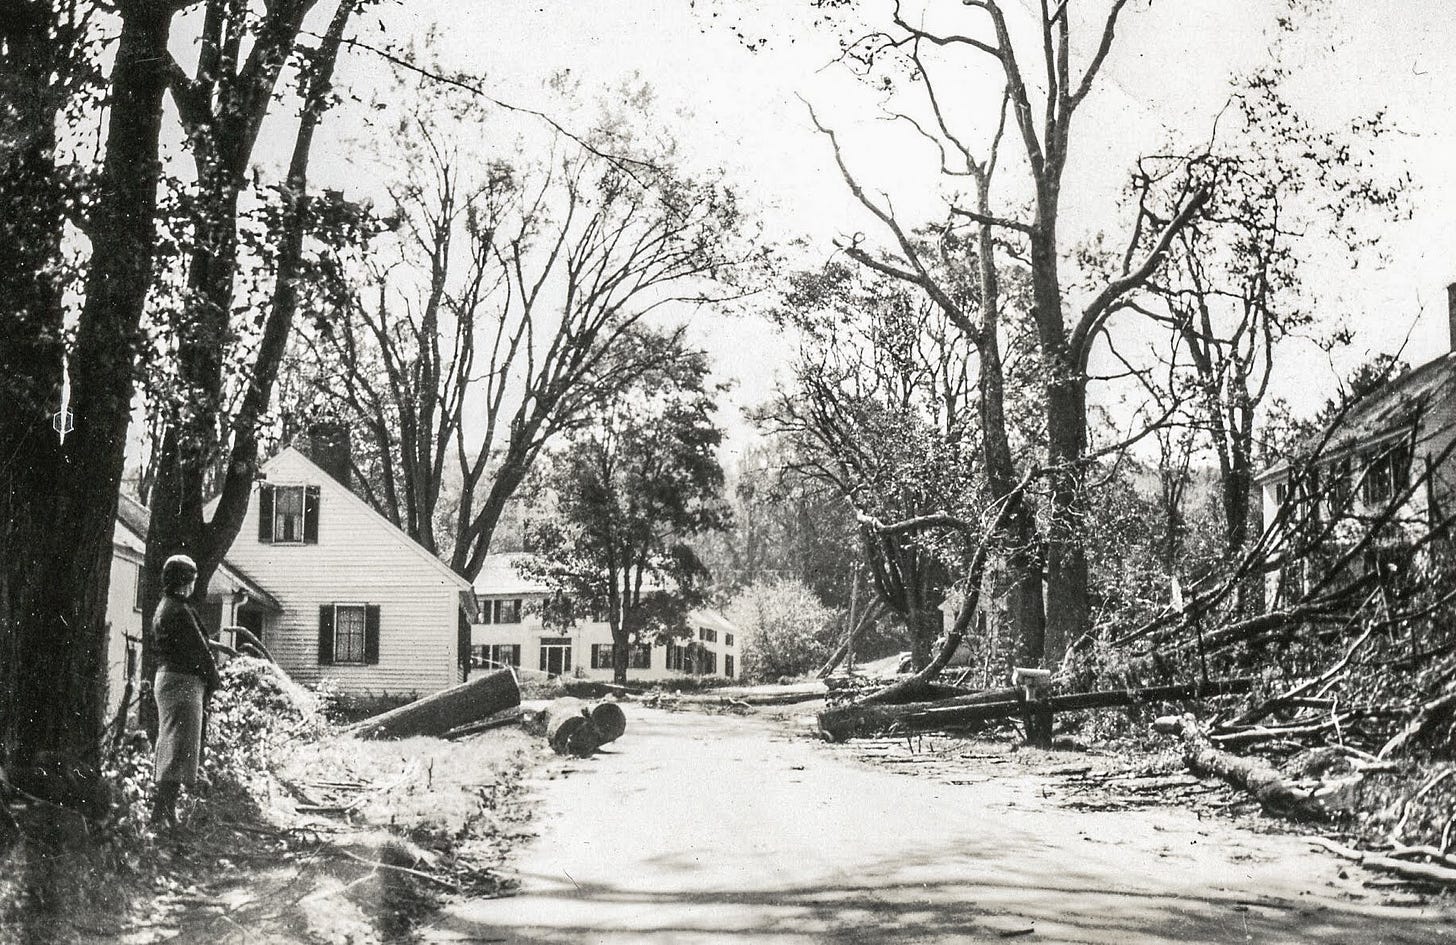 downed trees from 1938 hurricane